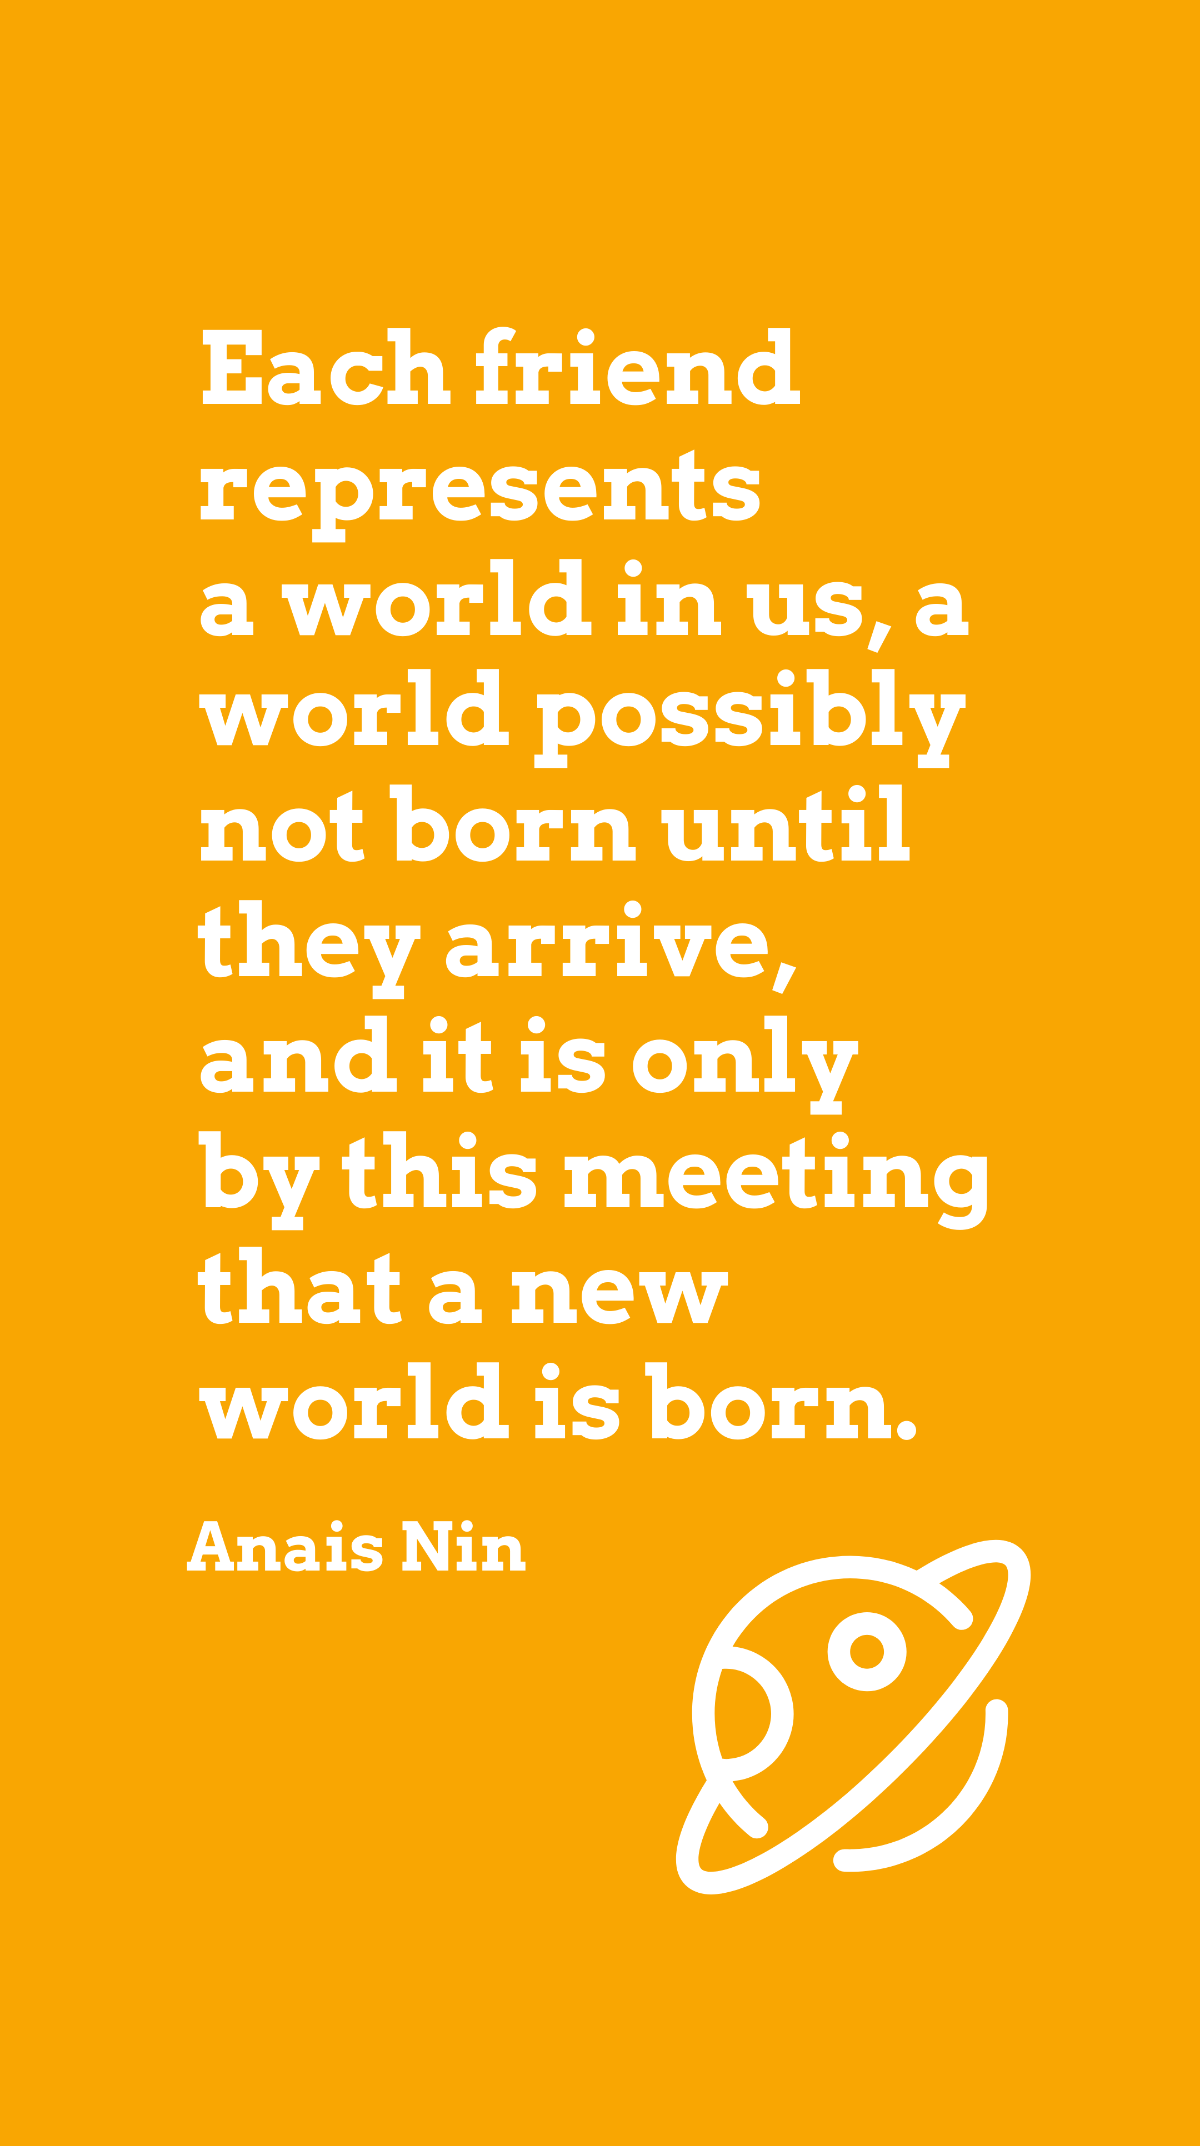 Anais Nin - Each friend represents a world in us, a world possibly not born until they arrive, and it is only by this meeting that a new world is born. Template